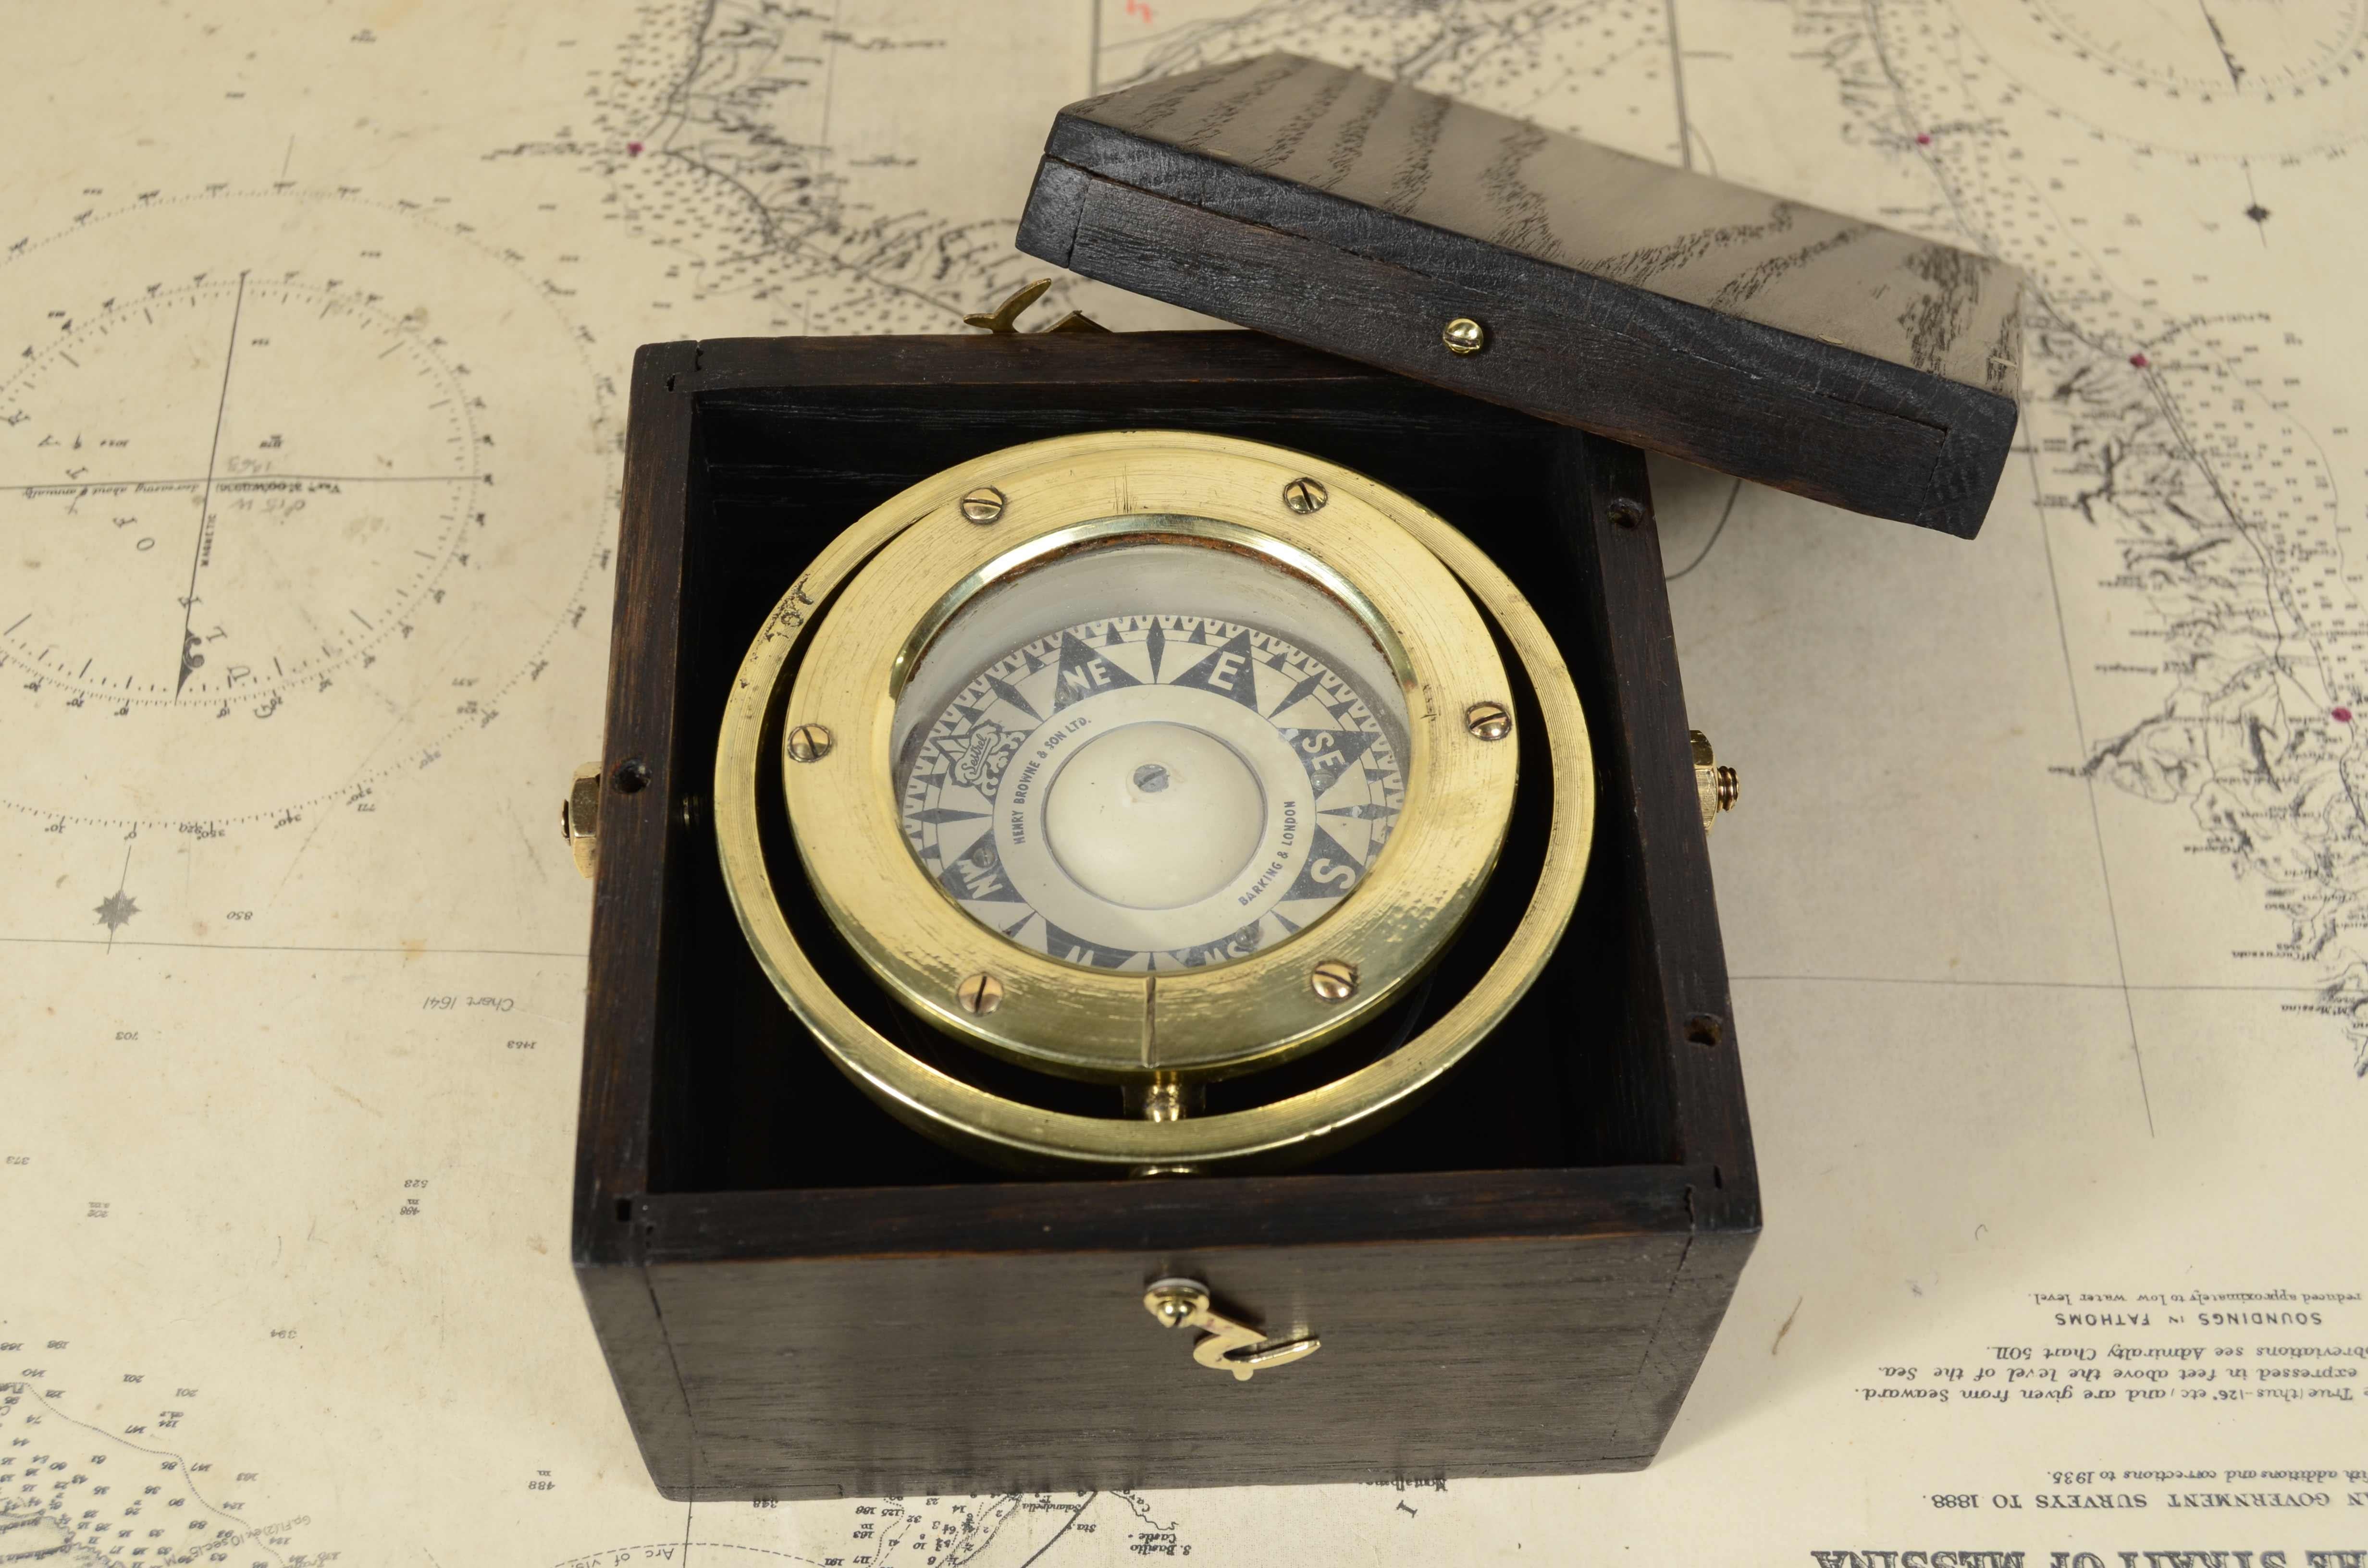 Nautical magnetic compass, signed Henry Browne & Son Ltd Barking & London  Sestrel Mark from the second half of the 19th century. 
Bon état. Housed in its original wooden box and mounted on universal joint.
Box size 13.5x13.5x10 cm - inches